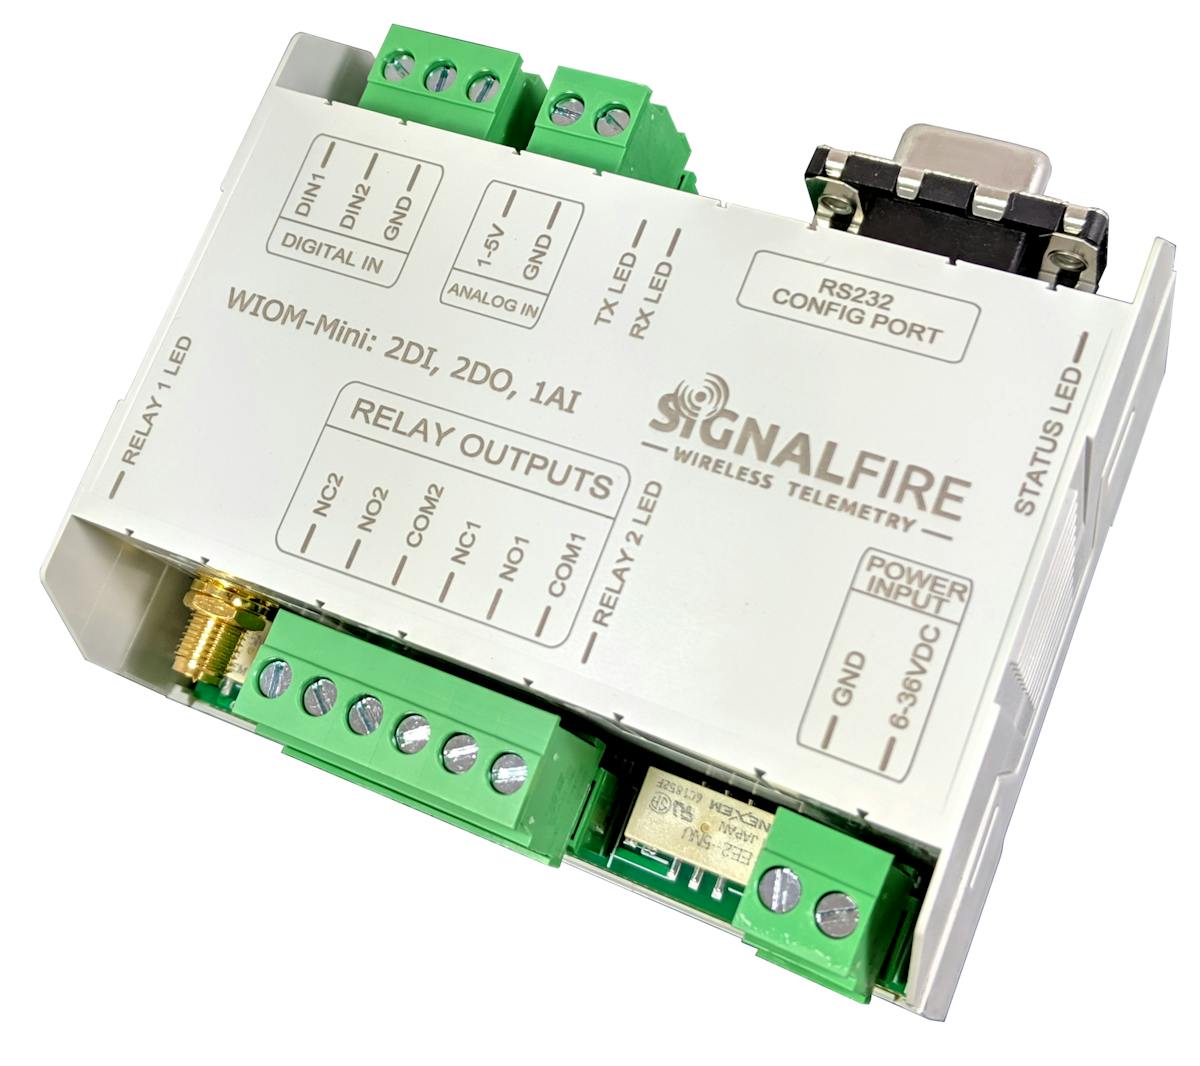 The Mini Wireless I/O Module from SignalFire Wireless Telemetry integrates an antenna capable of a 3-mile range, which allows a pair of modules to communicate in a point-to-point mode or directly to a Gateway.